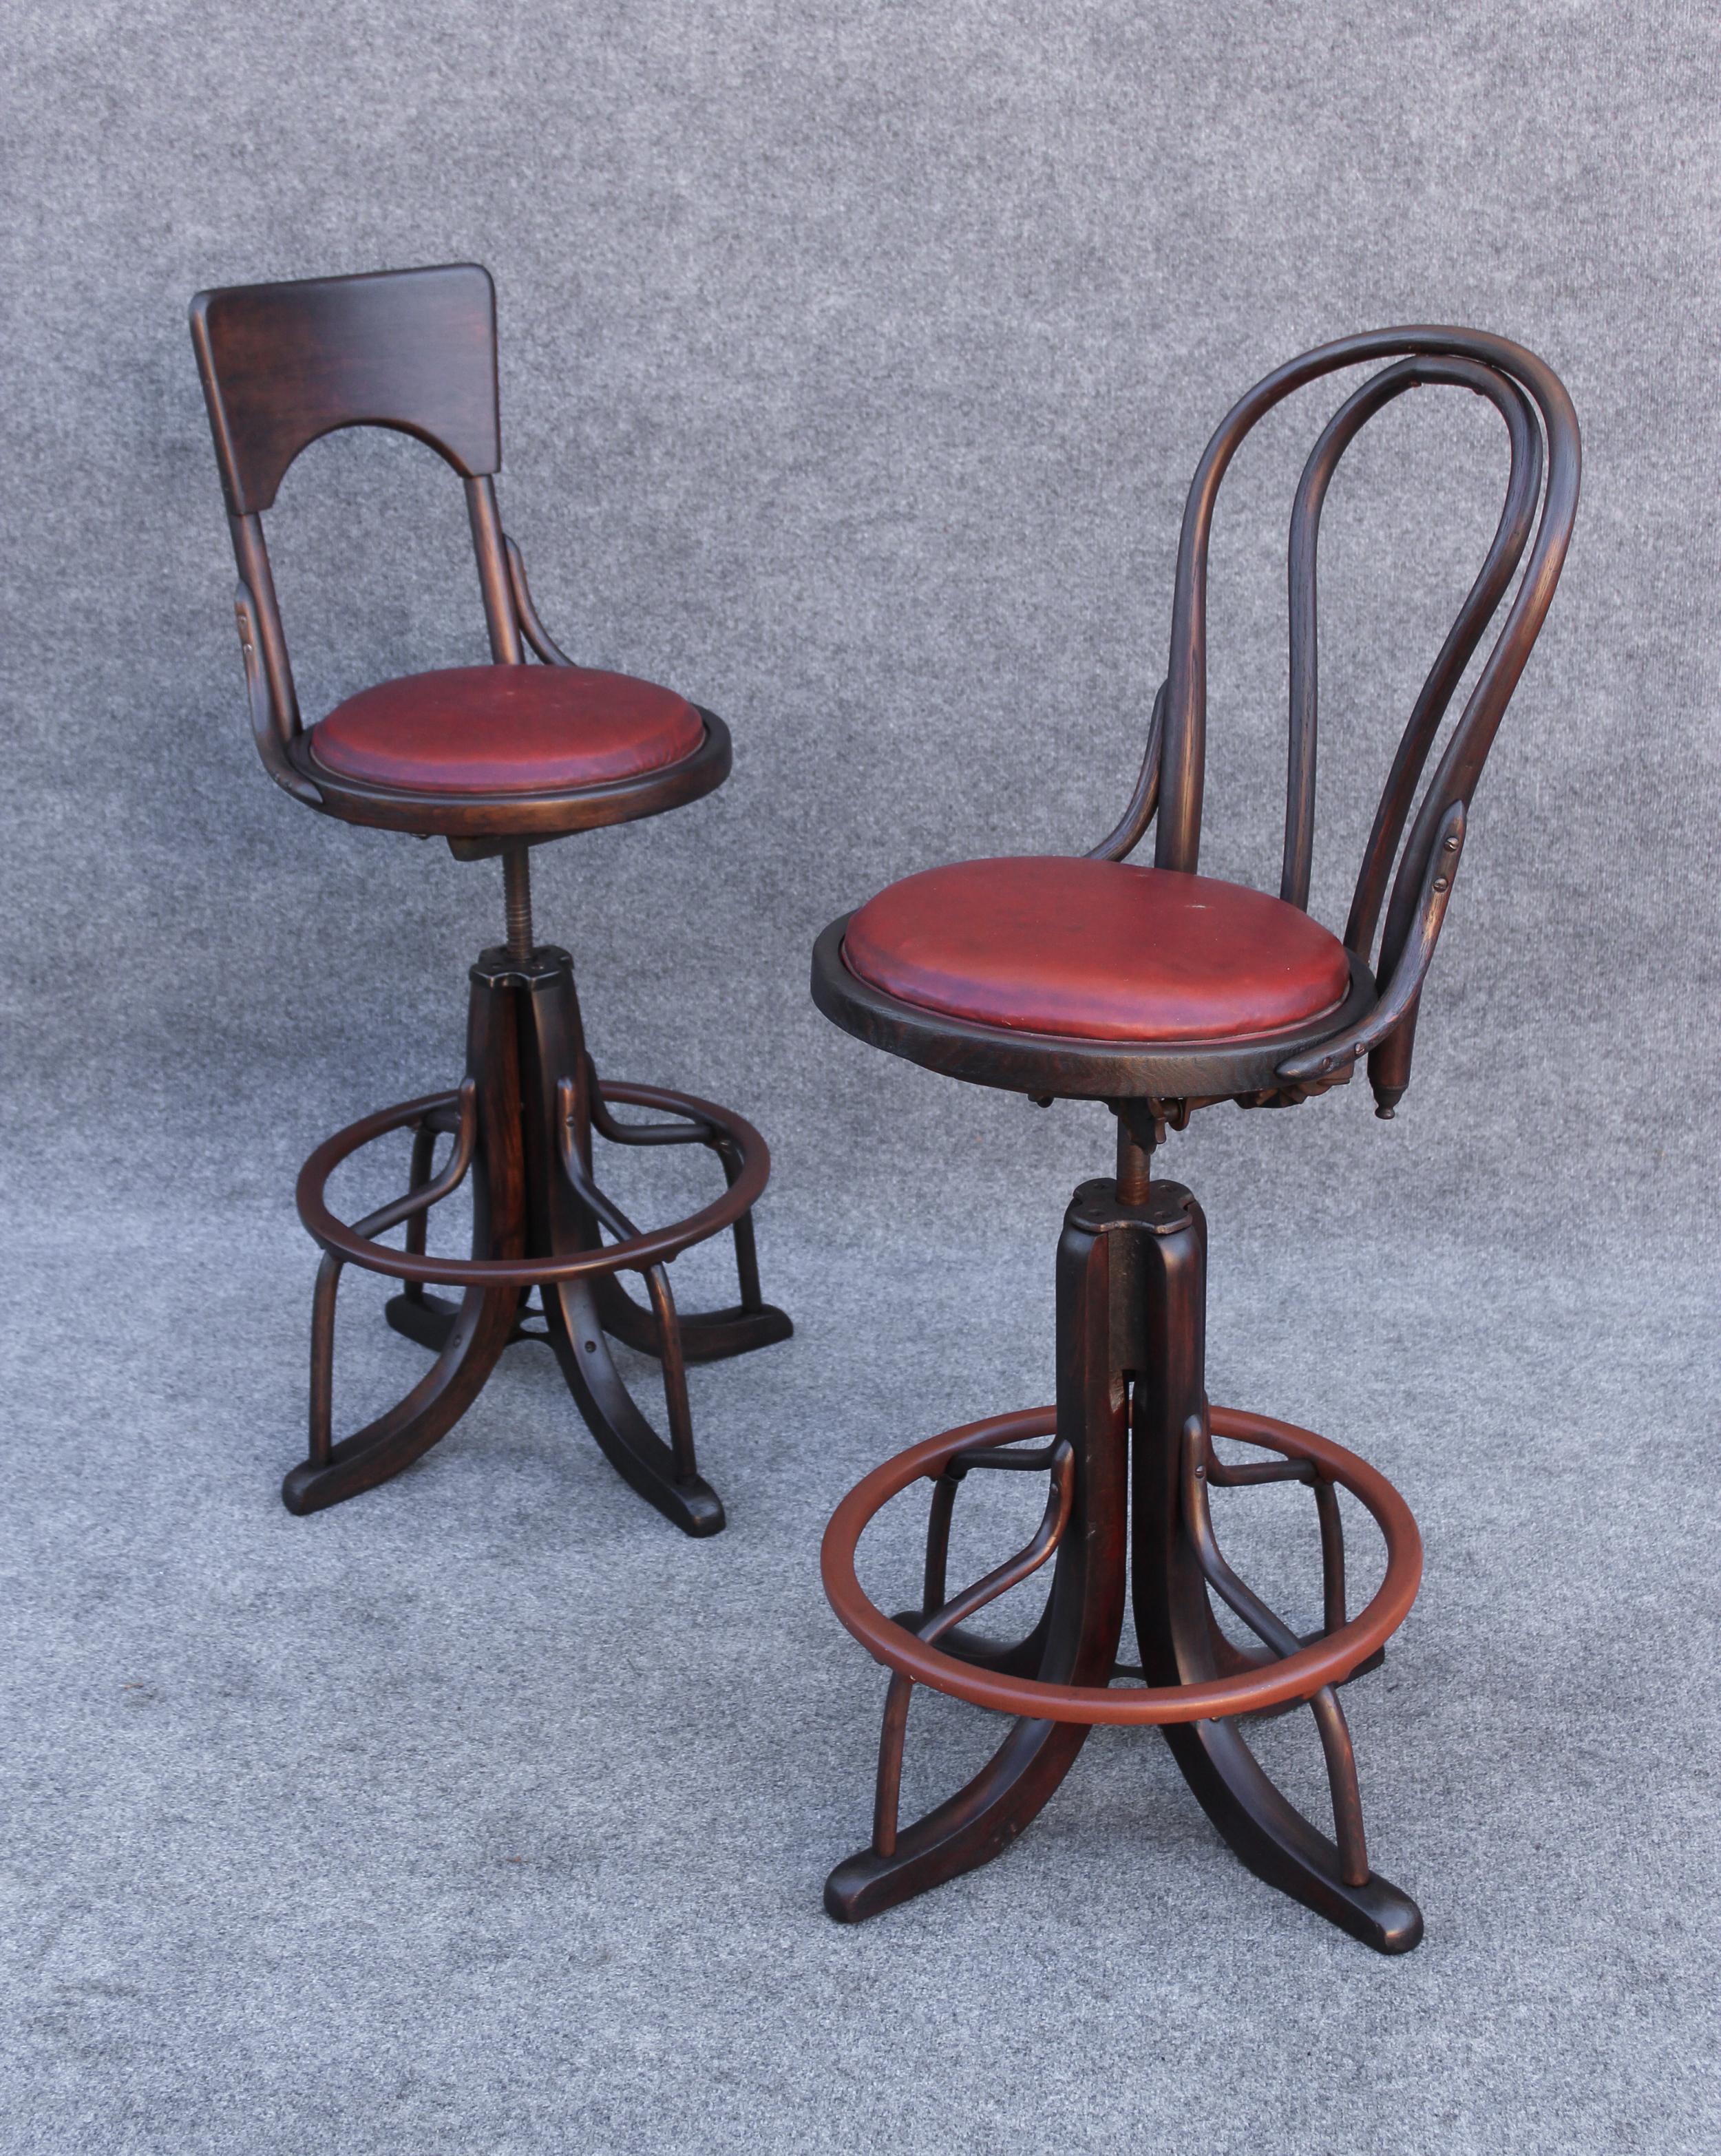 Possibly manufactured by Thonet in Austria between 1910 and 1915 and used by phone operators at Bell System. Constructed of solid maple, oak, and enameled steel, with hard rubber footrests. Our examples have been completely refinished. Seat pads